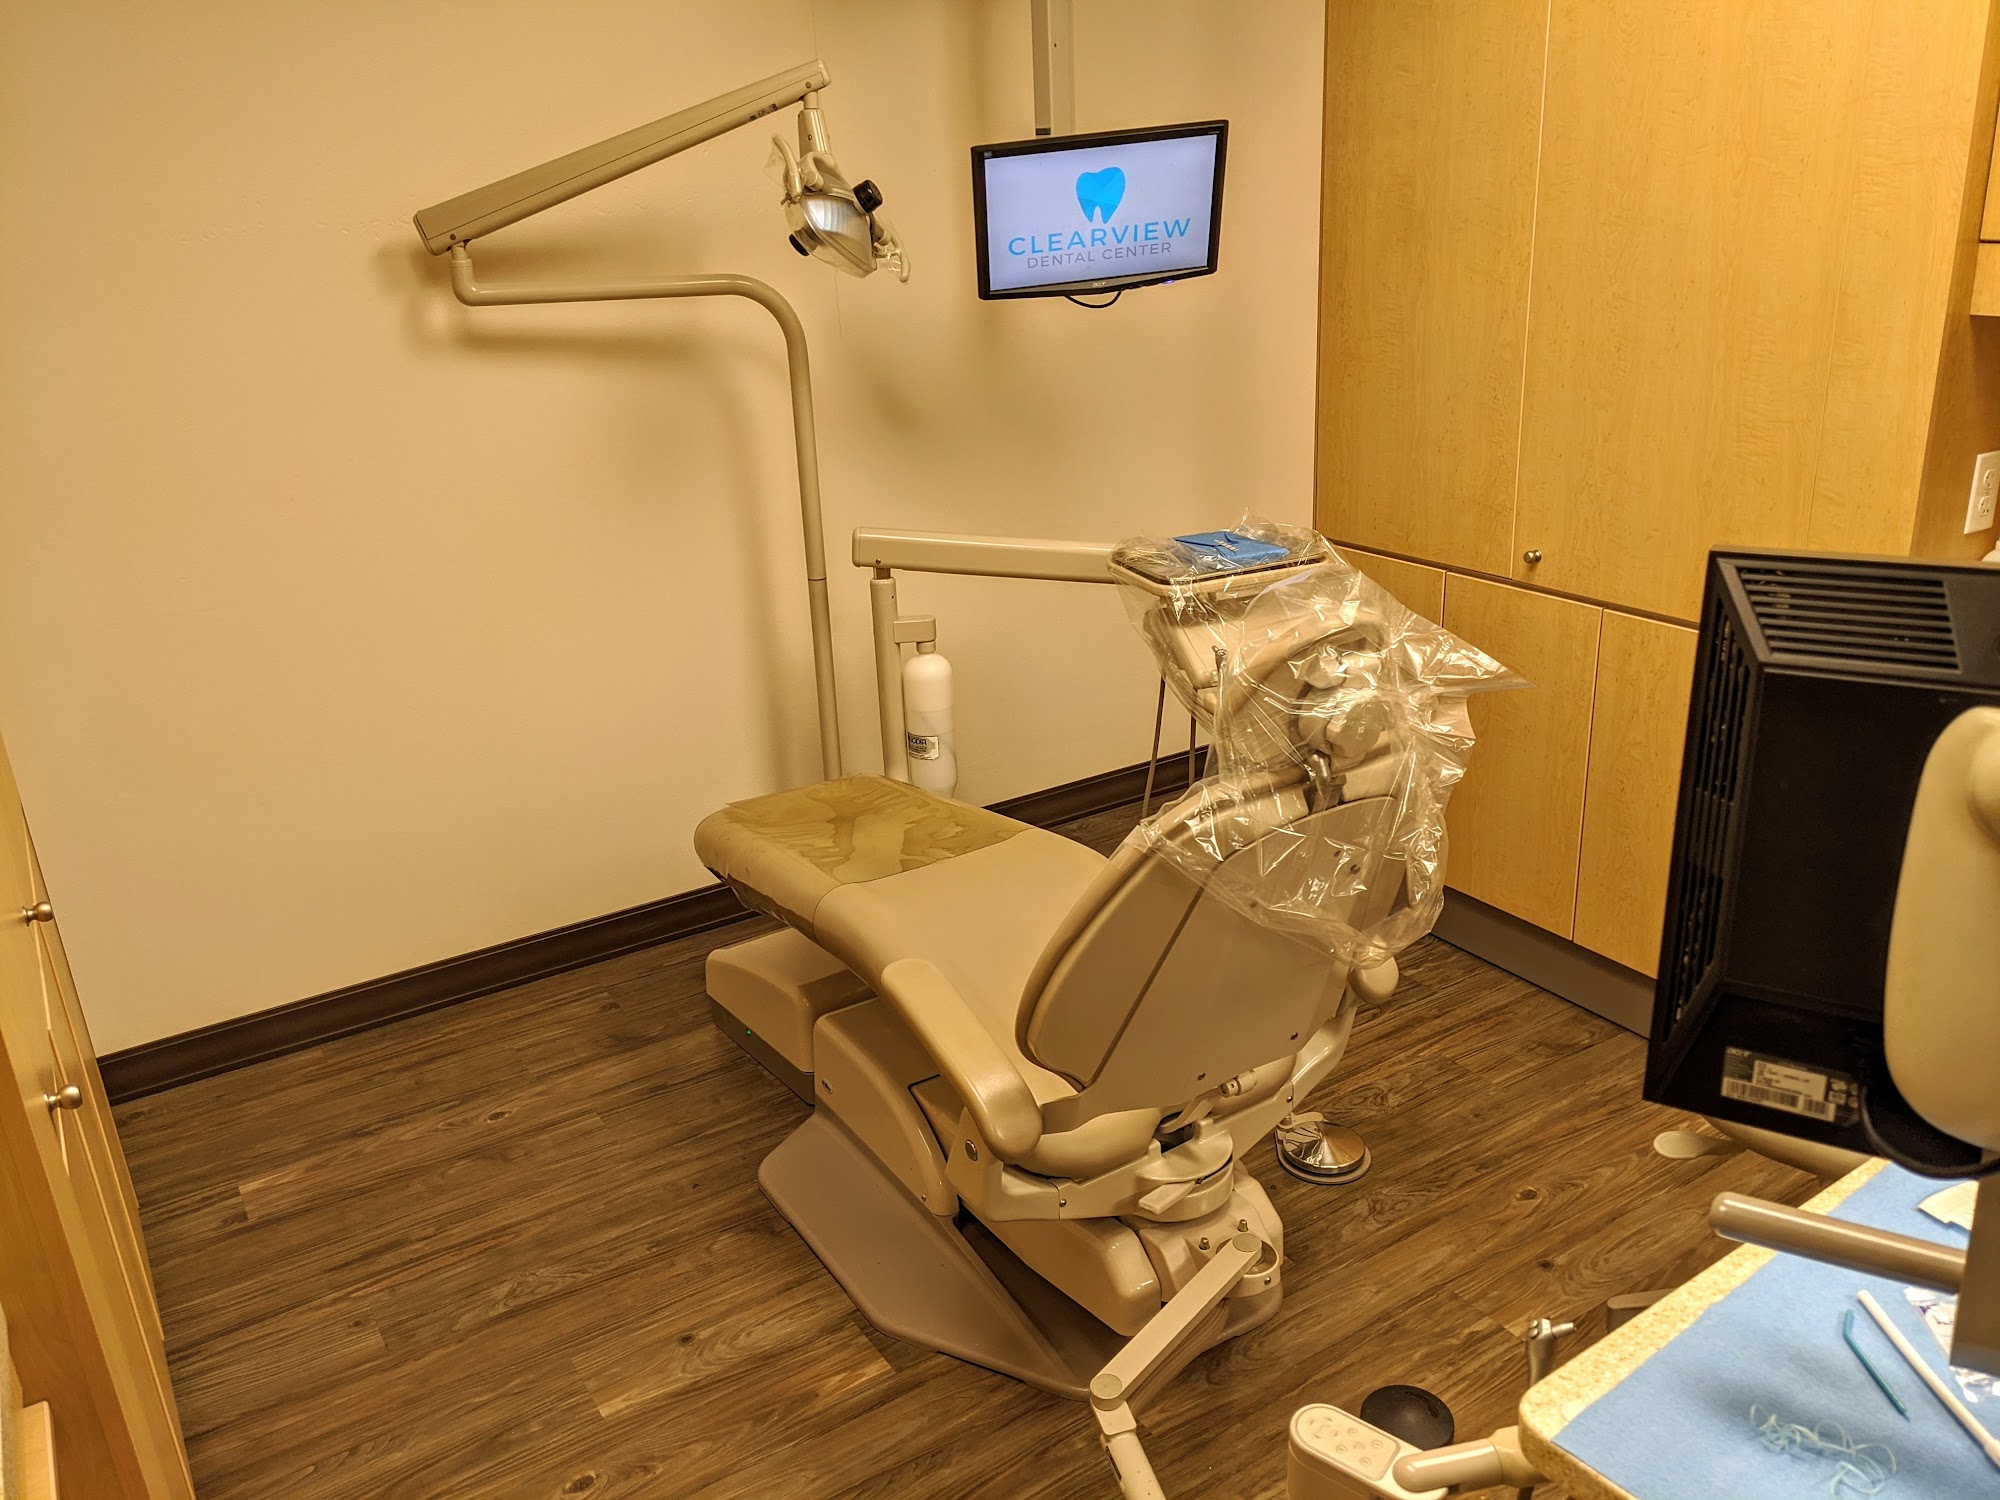 Clearview Dental Center